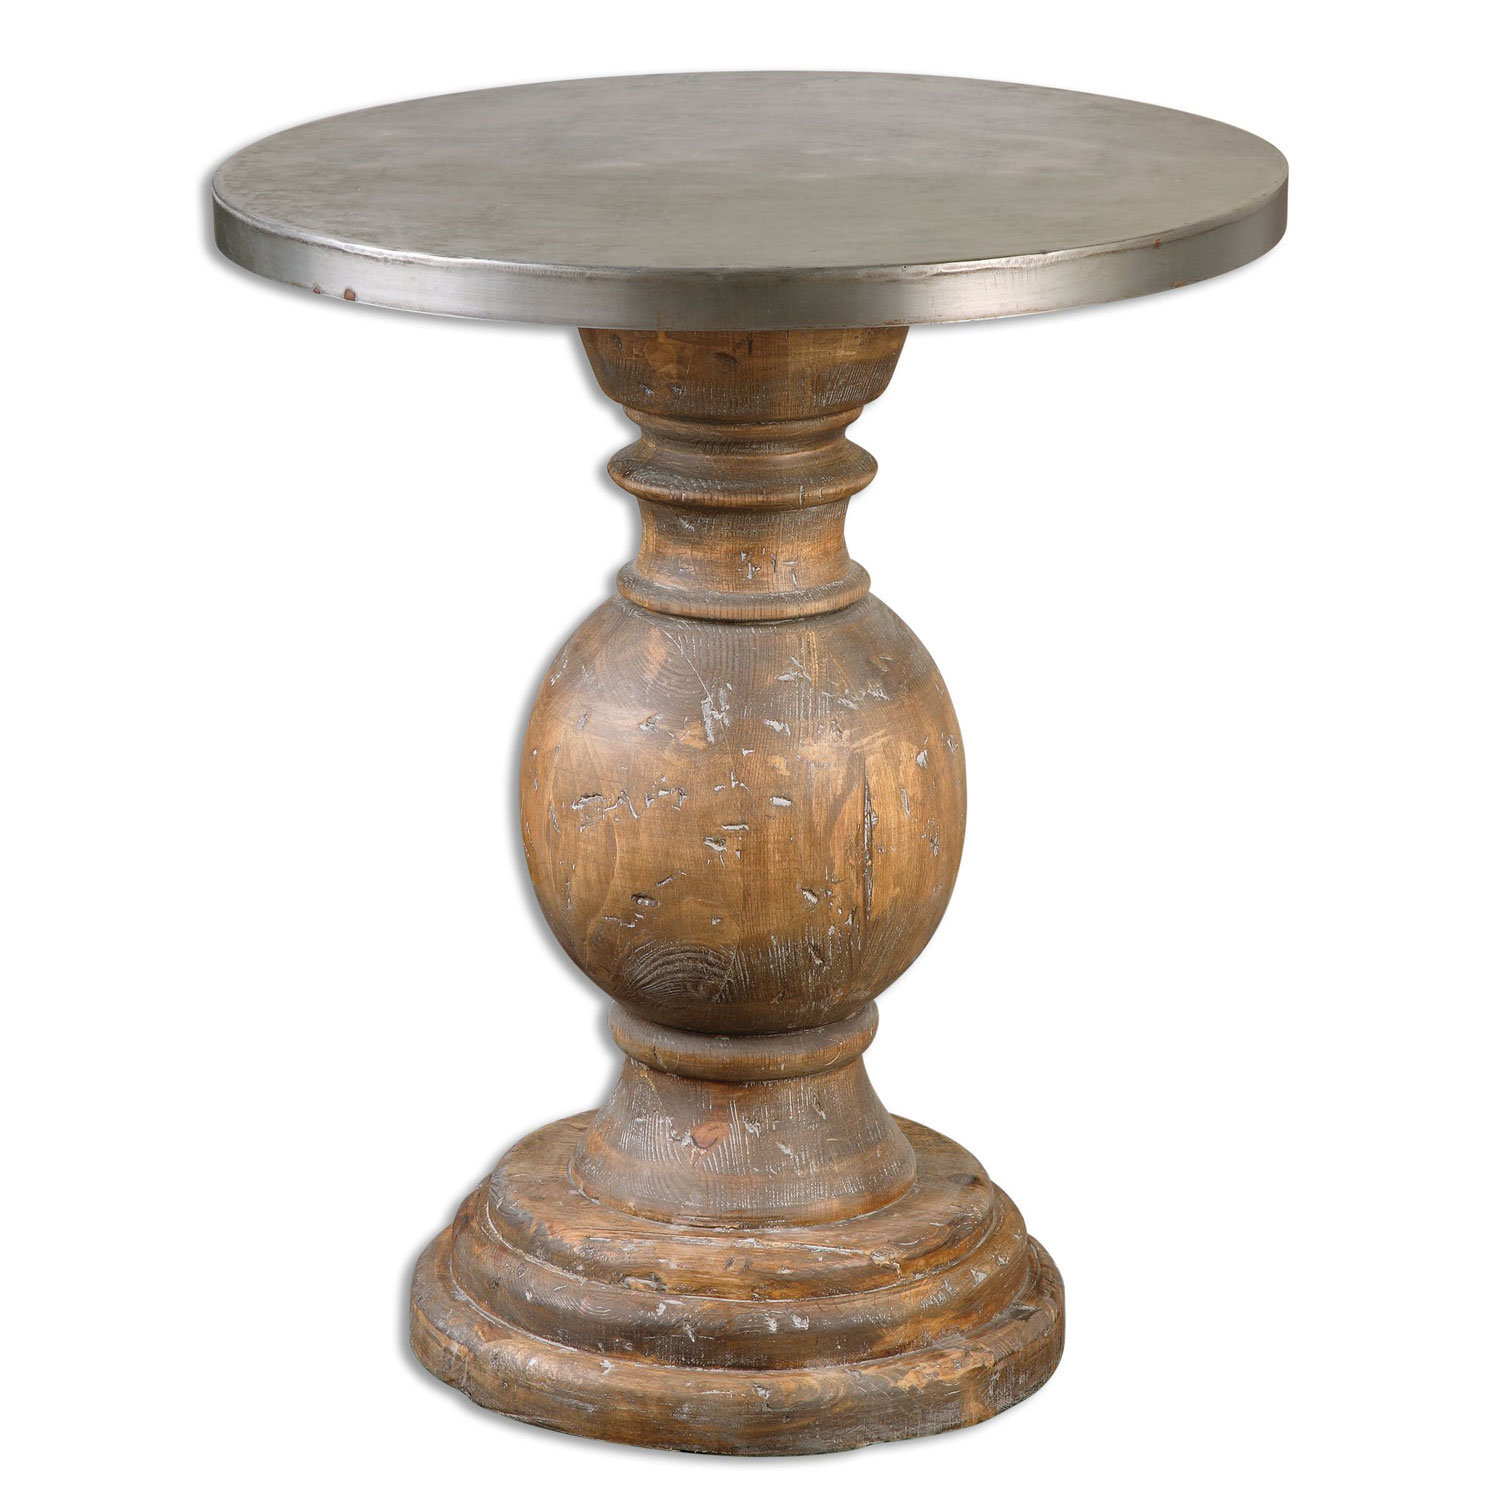 uttermost blythe reclaimed fir wood accent table bellacor antique round pedestal hover zoom pier one chairs west elm leather couch target sofa tables furniture hampton bay patio